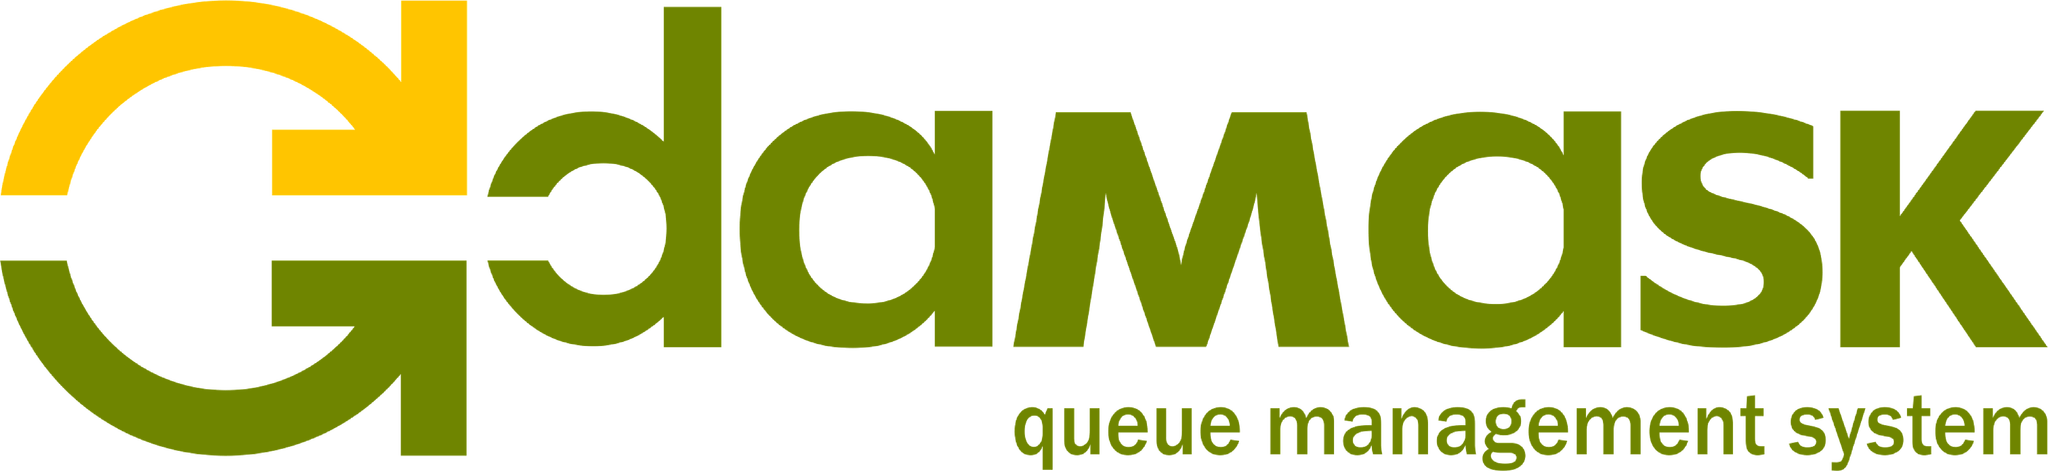 A Green And Black Logo